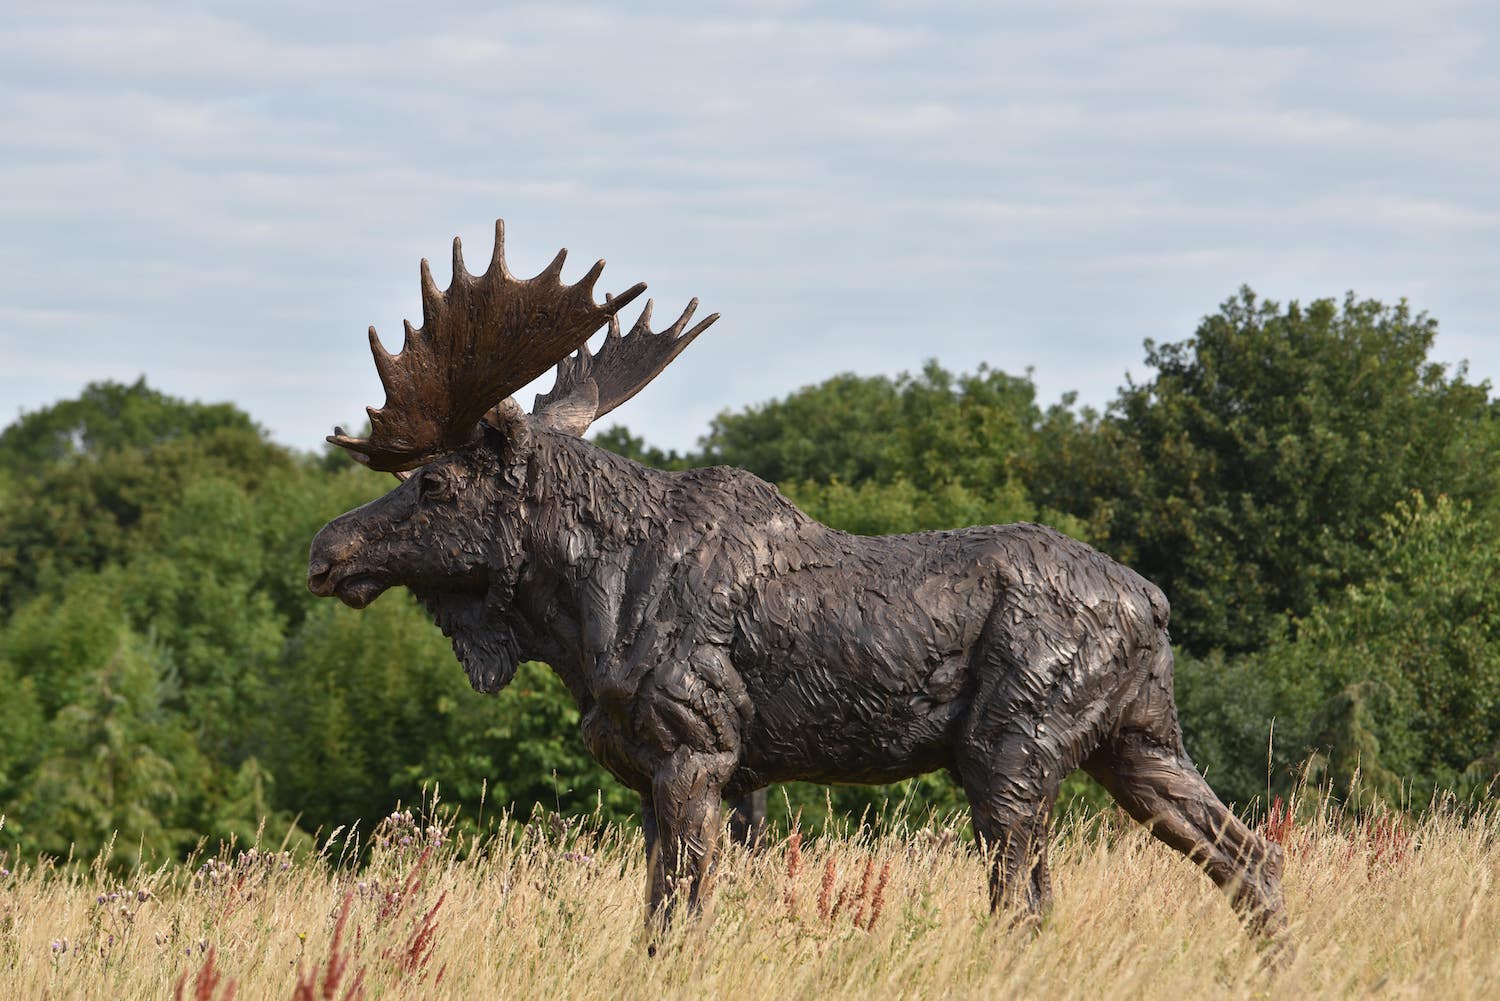 Life size Moose sculpture in field